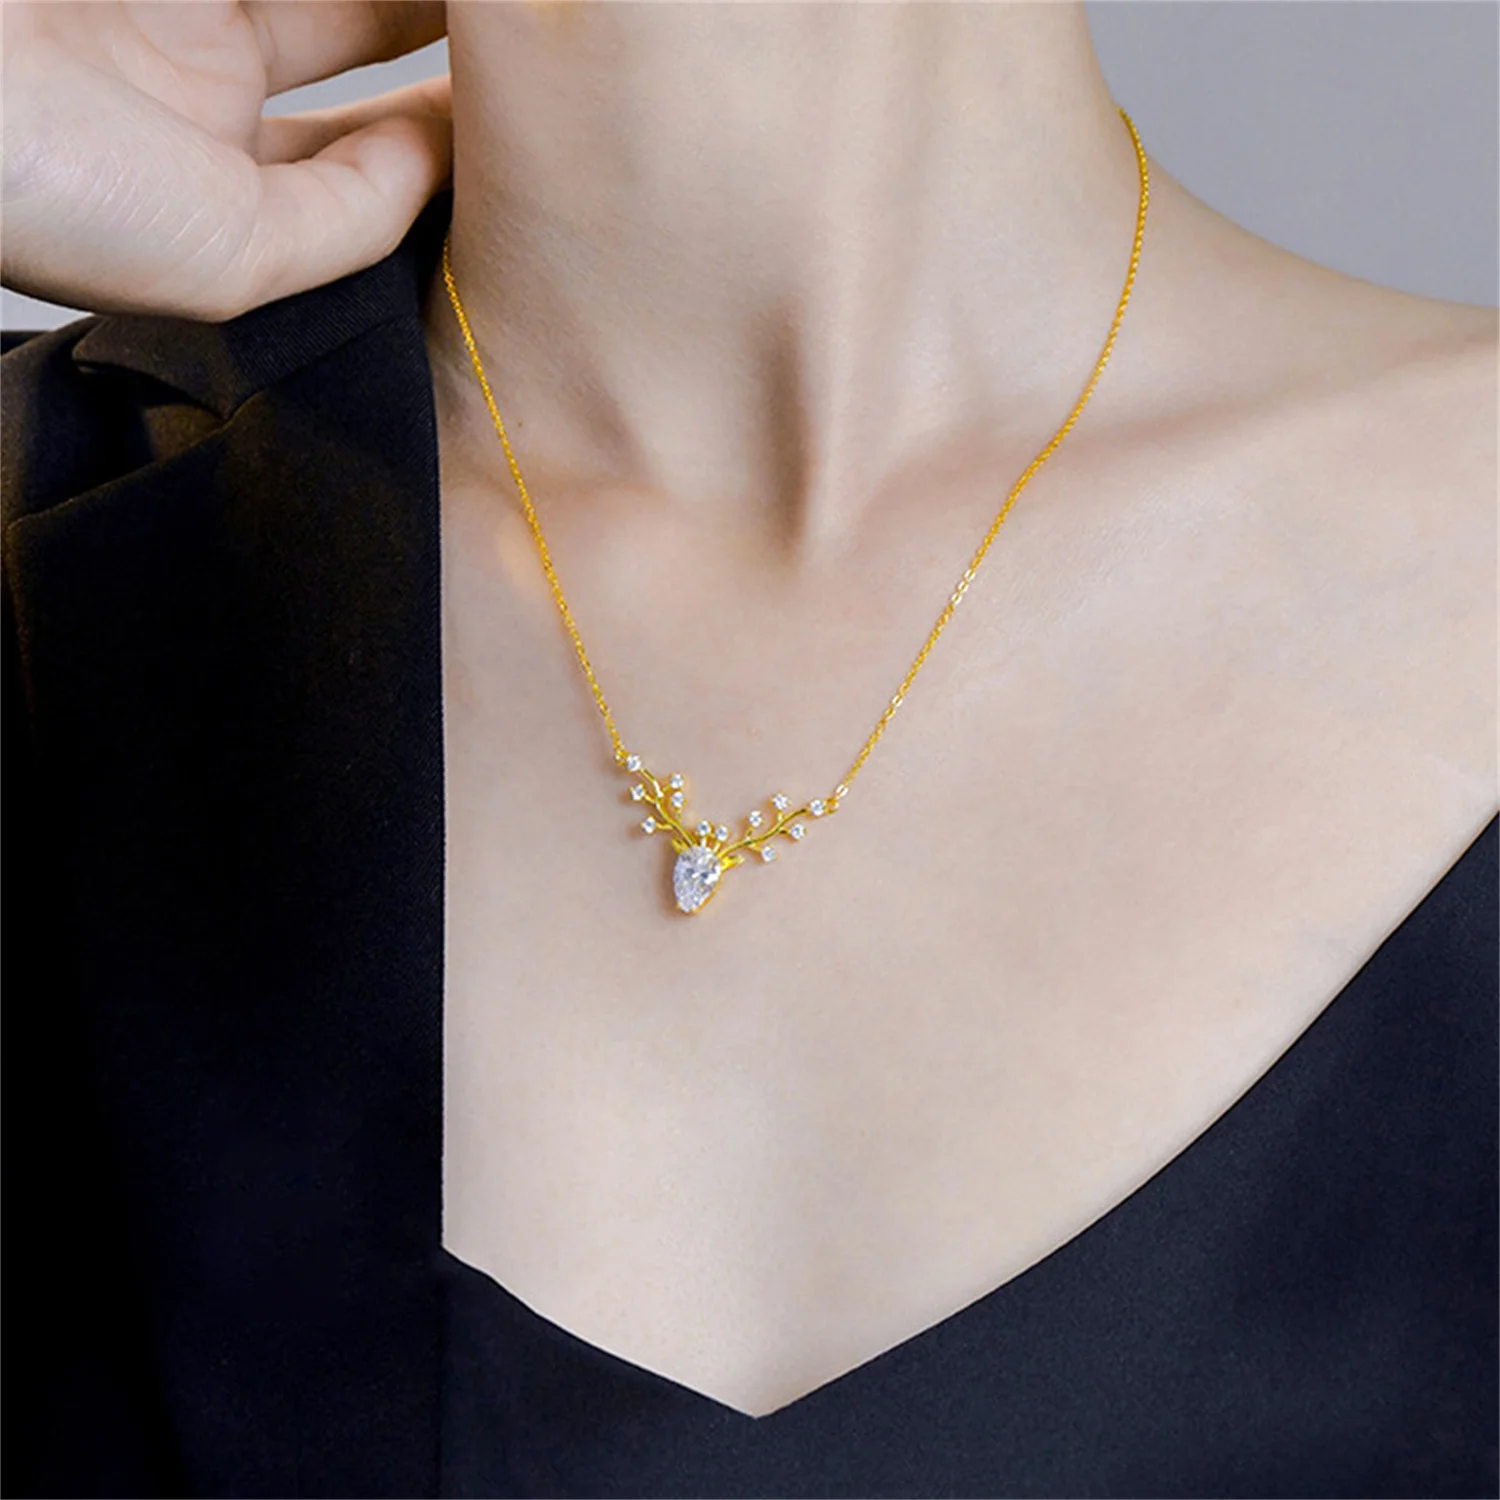 

Fashion Christmas Deer Pendant Necklace For Women Girls Xmas Elk Crystal Choker Chain Fashion Wedding Party New Year Jewelry